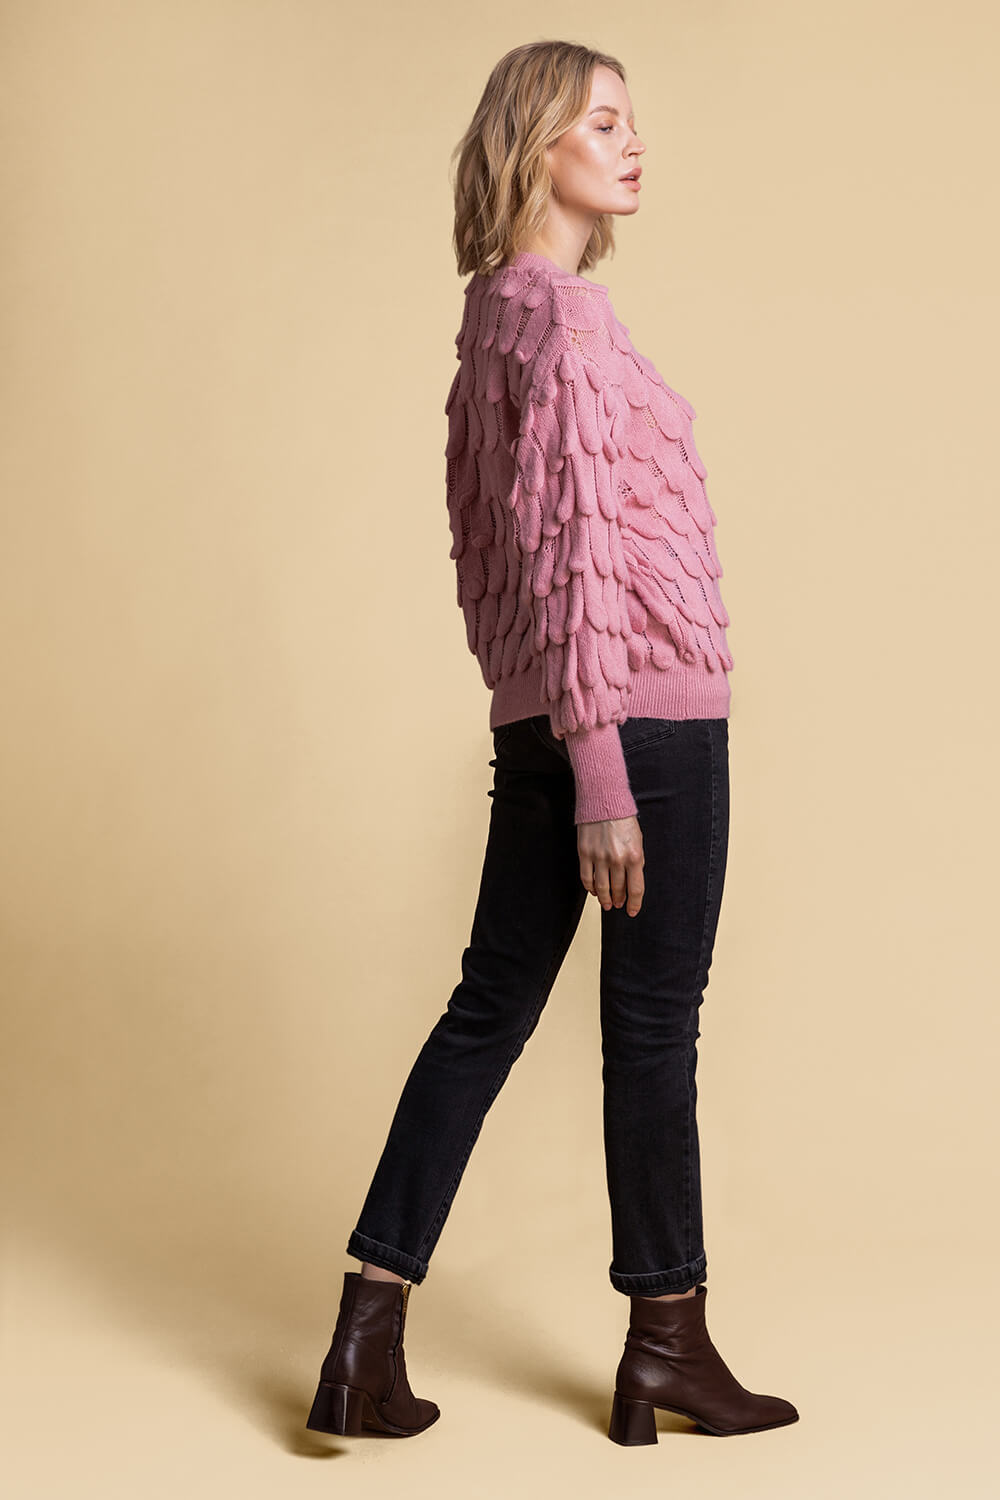 Rose Scallop Textured Knit Jumper, Image 2 of 5